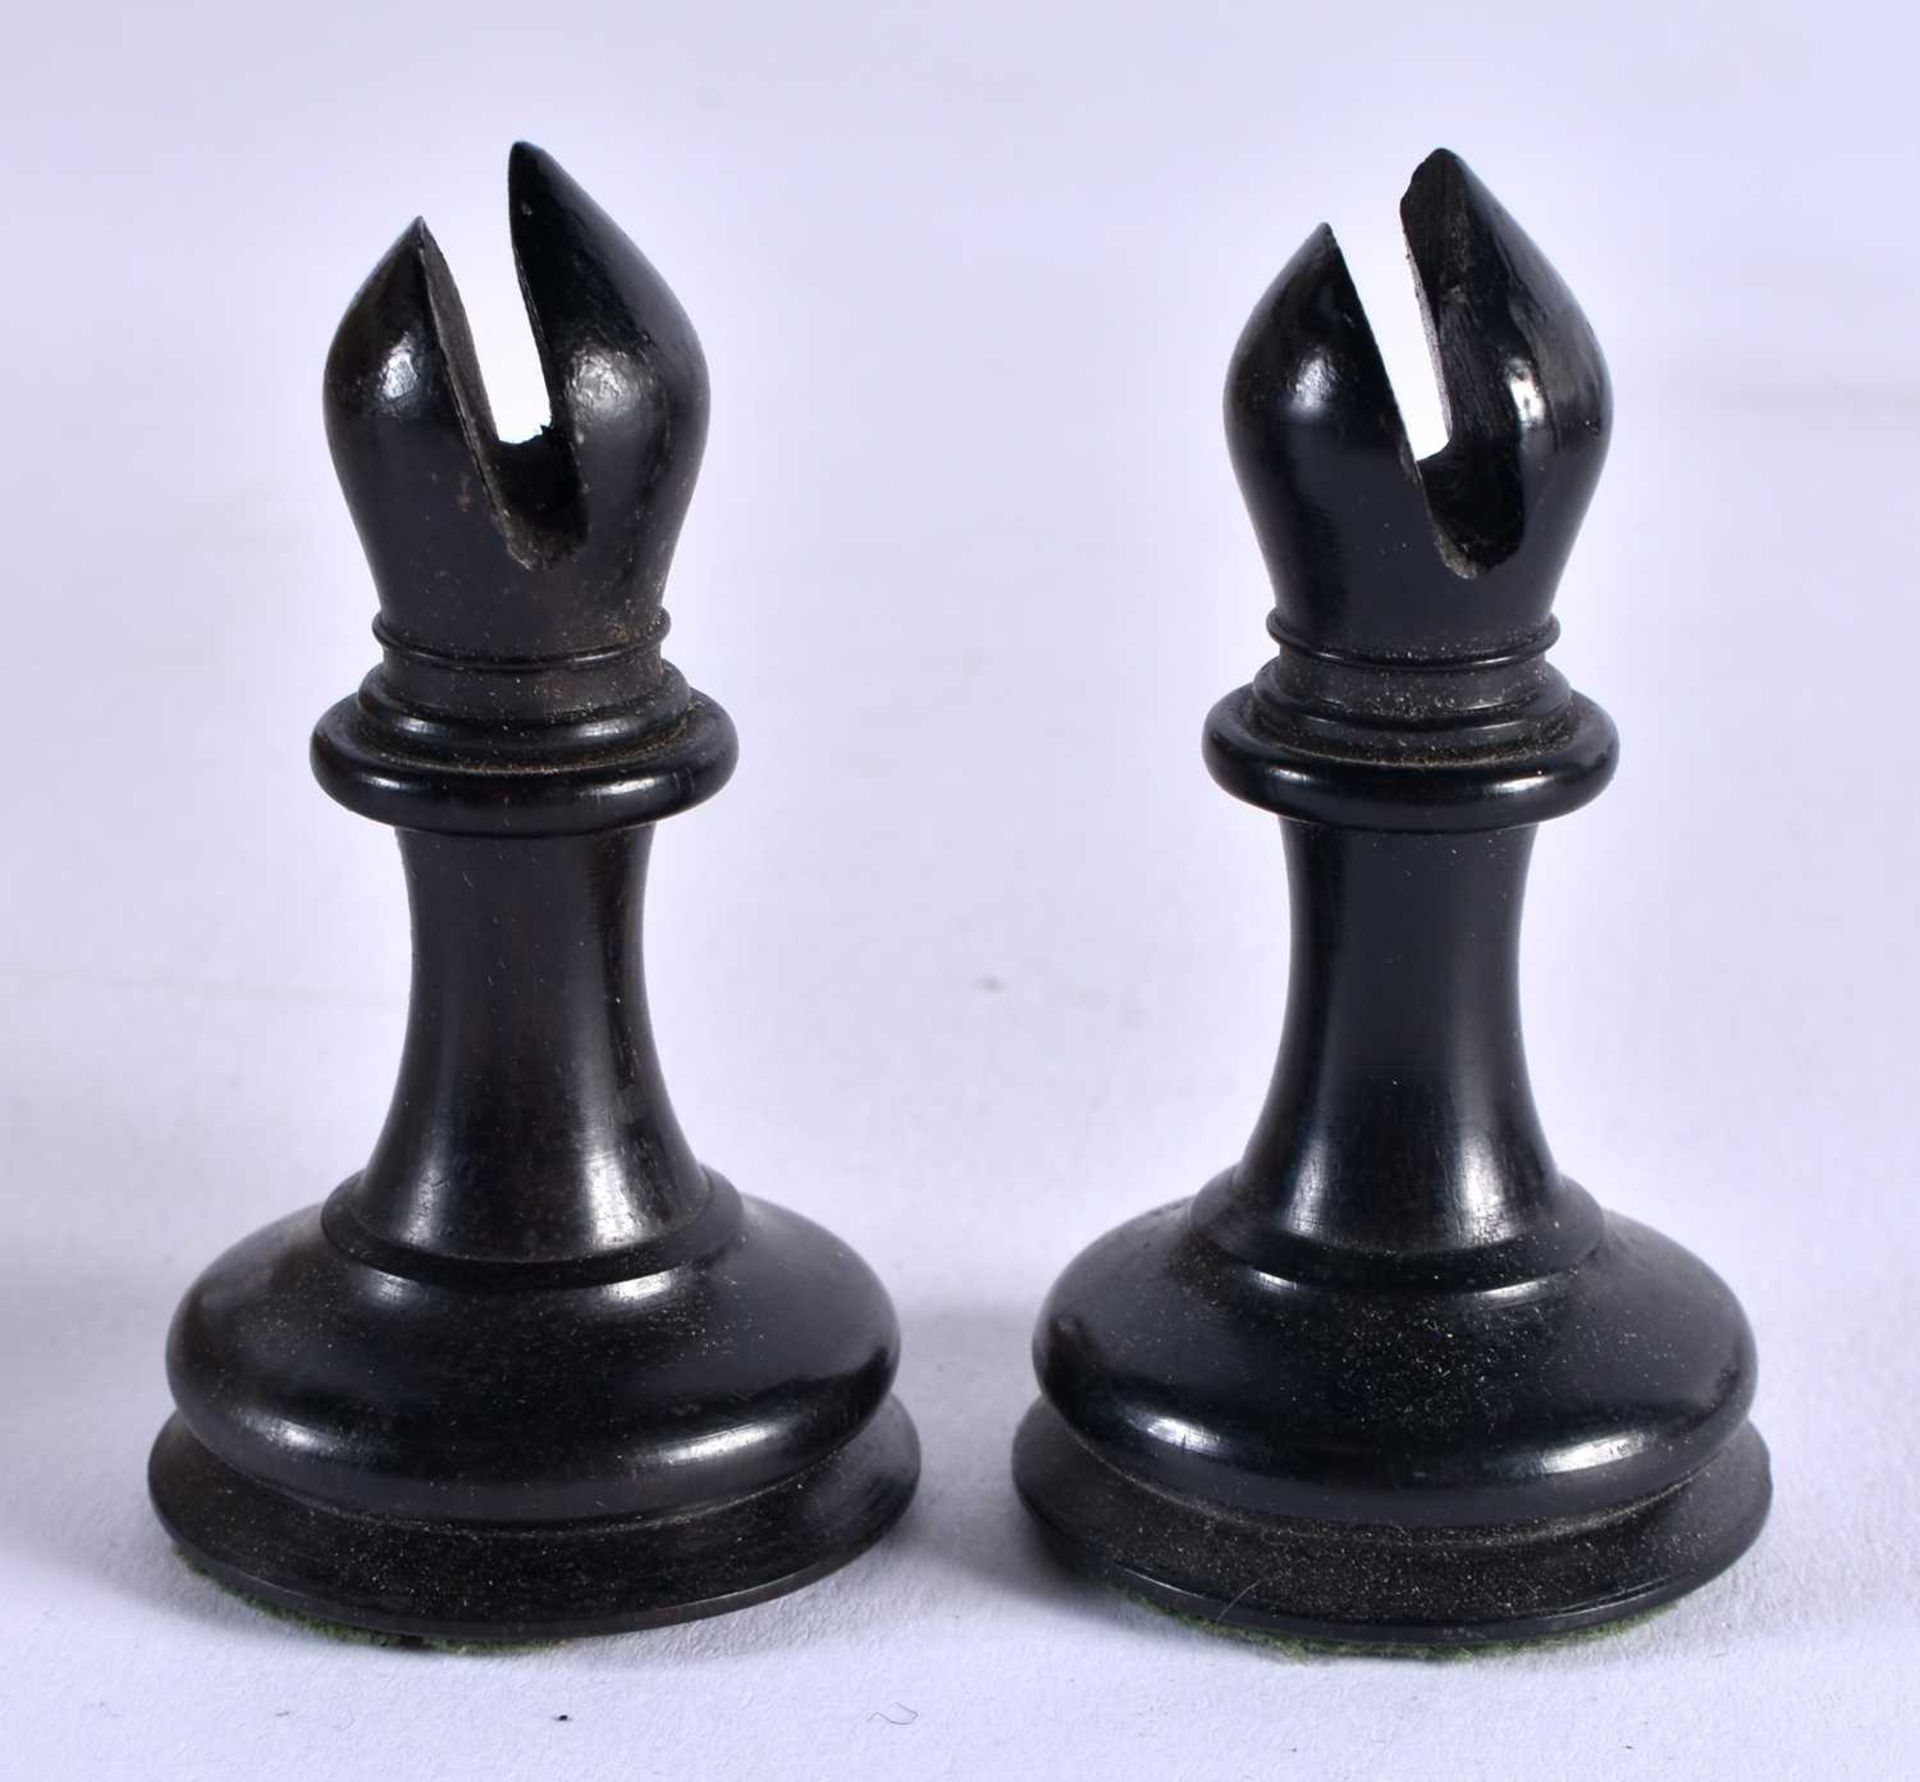 A LARGE ANTIQUE STAUNTON TYPE J JAQUES OF LONDON EBONY AND BOXWOOD CHESS SET (32 Pieces complete) - Image 26 of 44